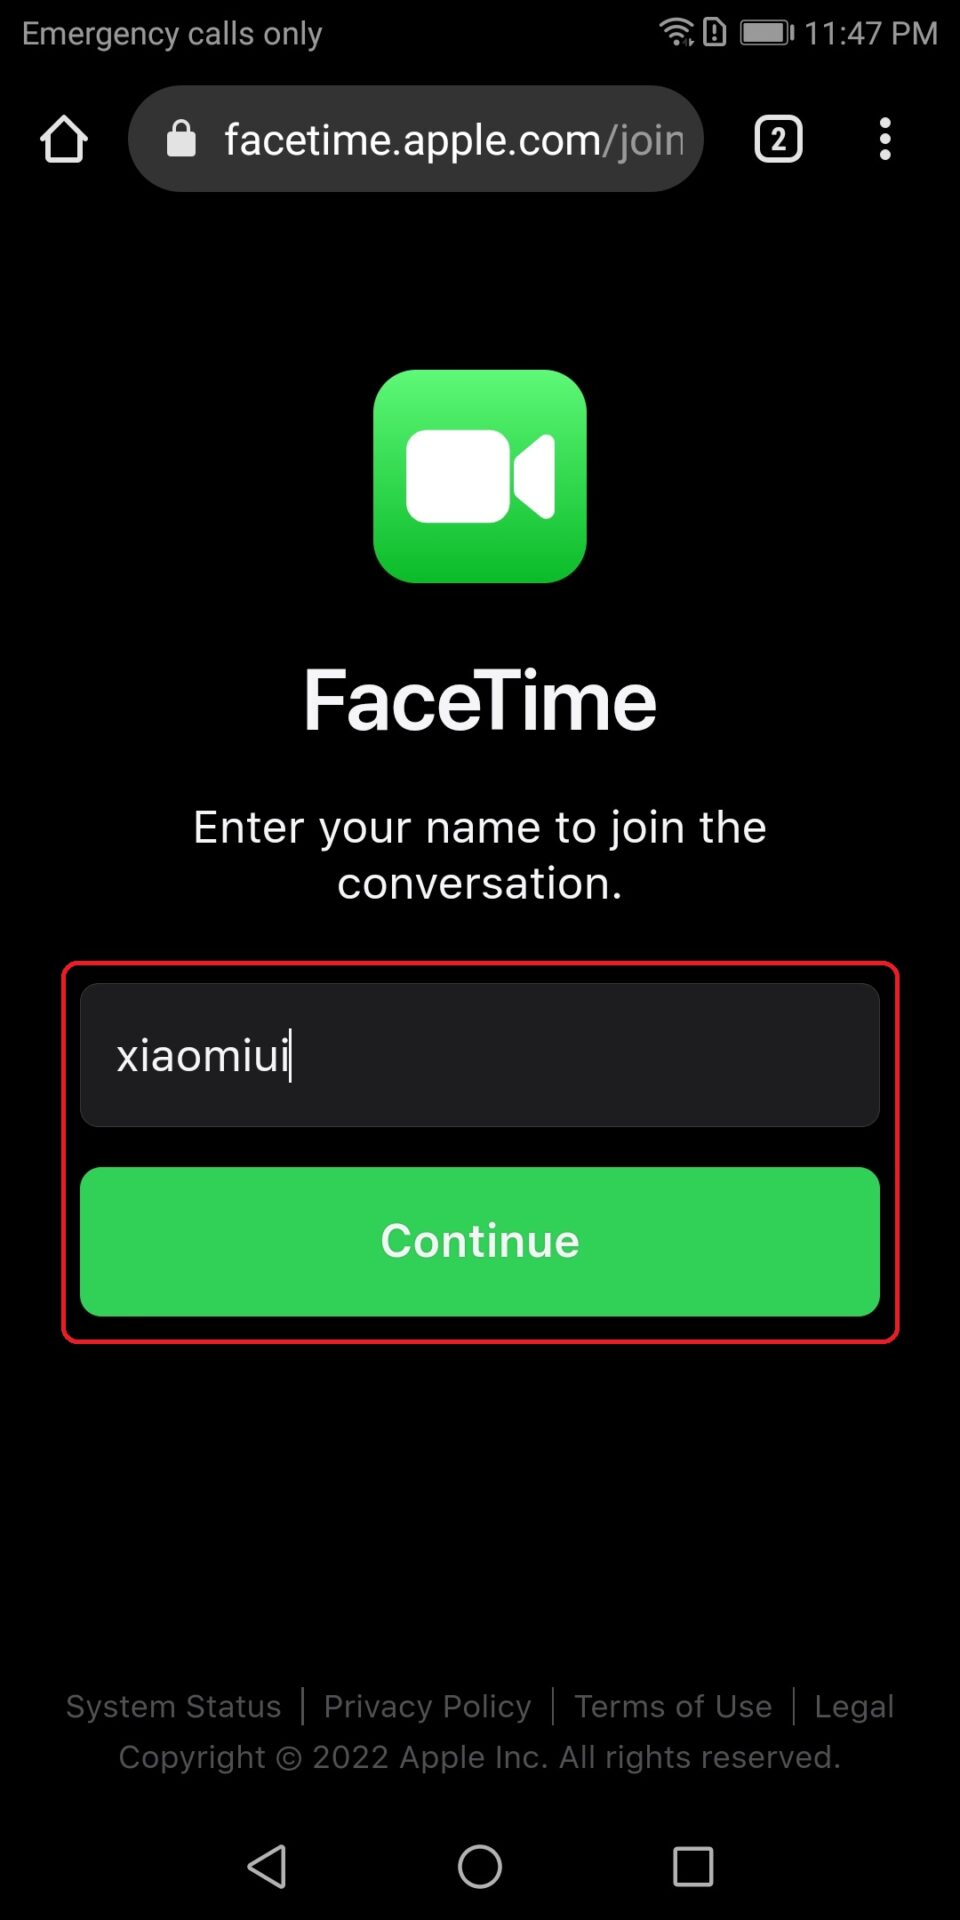 FaceTime on Android